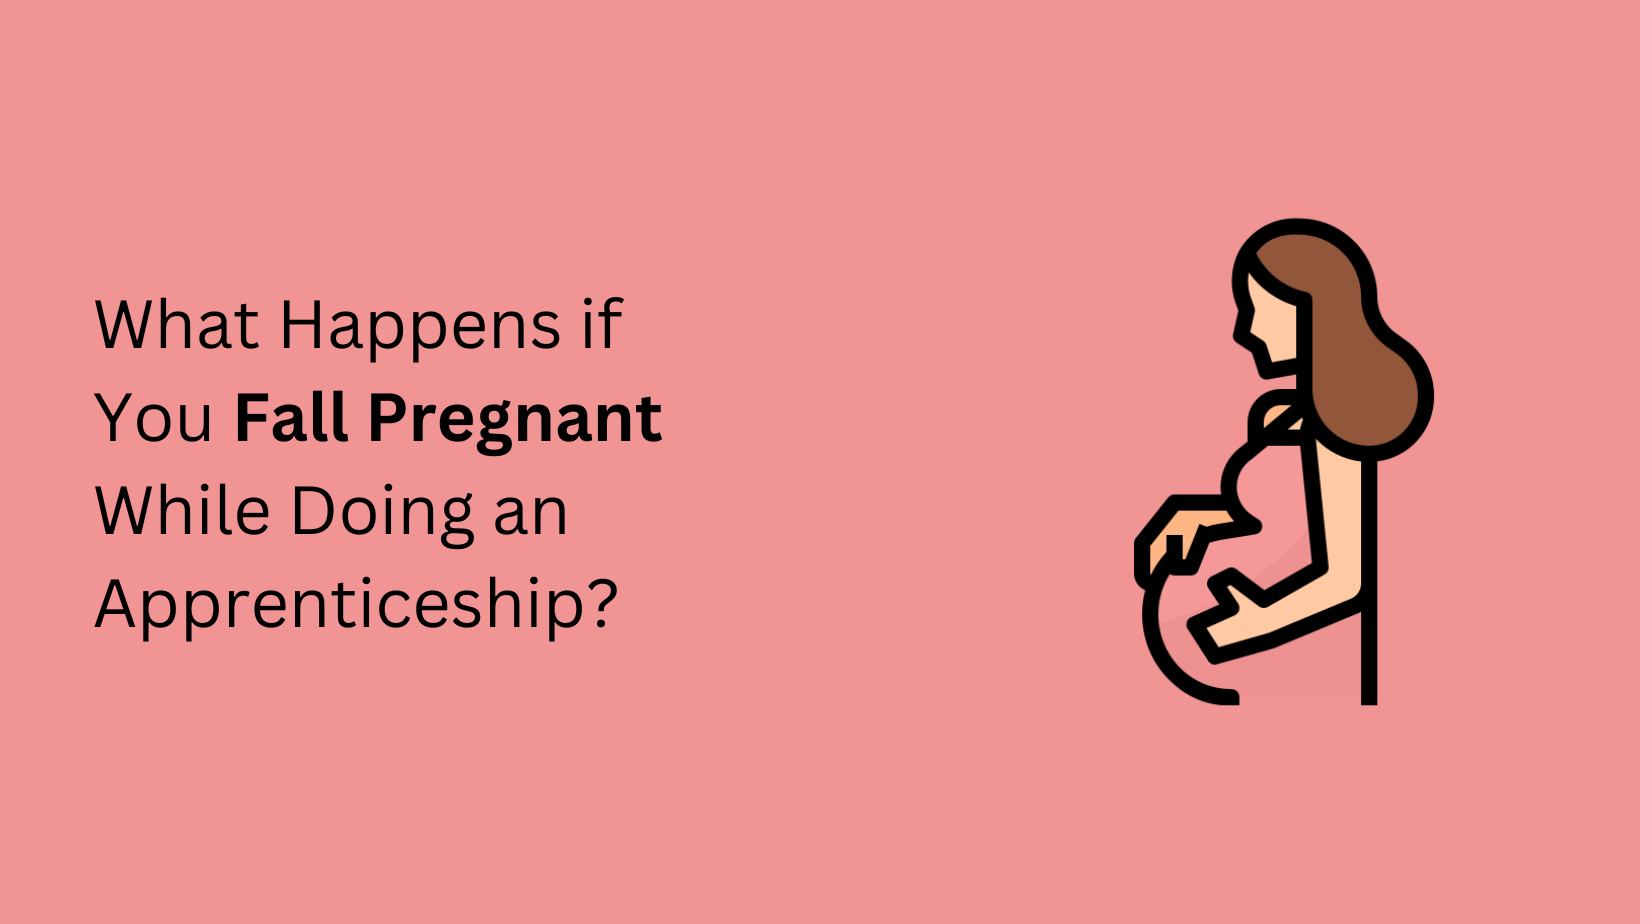 What Happens if You Fall Pregnant While Doing an Apprenticeship